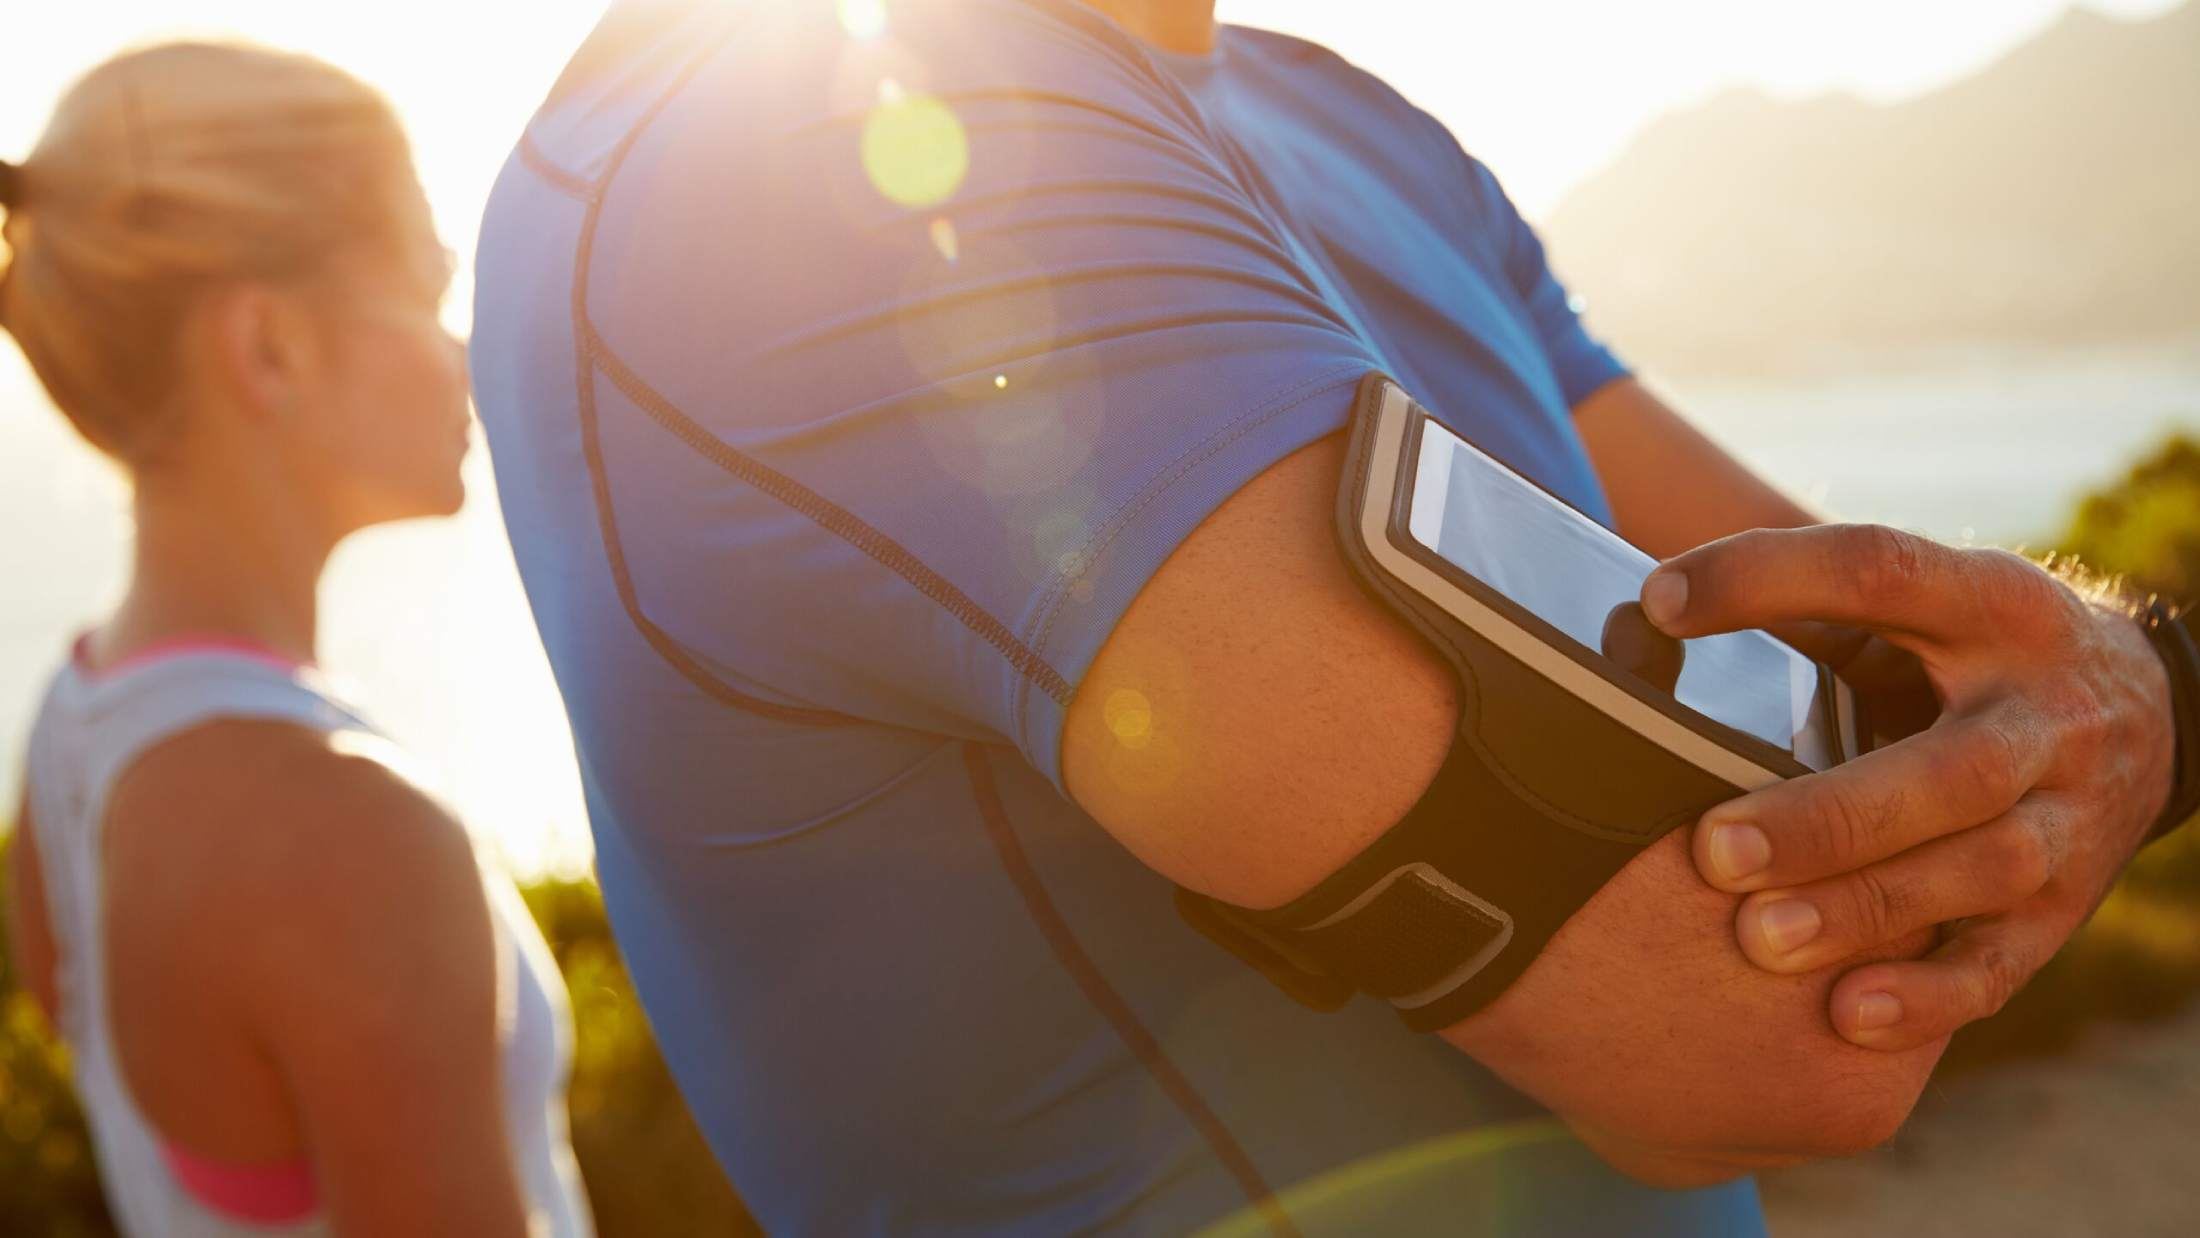 Man with smartphone strapped to his arm accompanied by a woman going for a jog